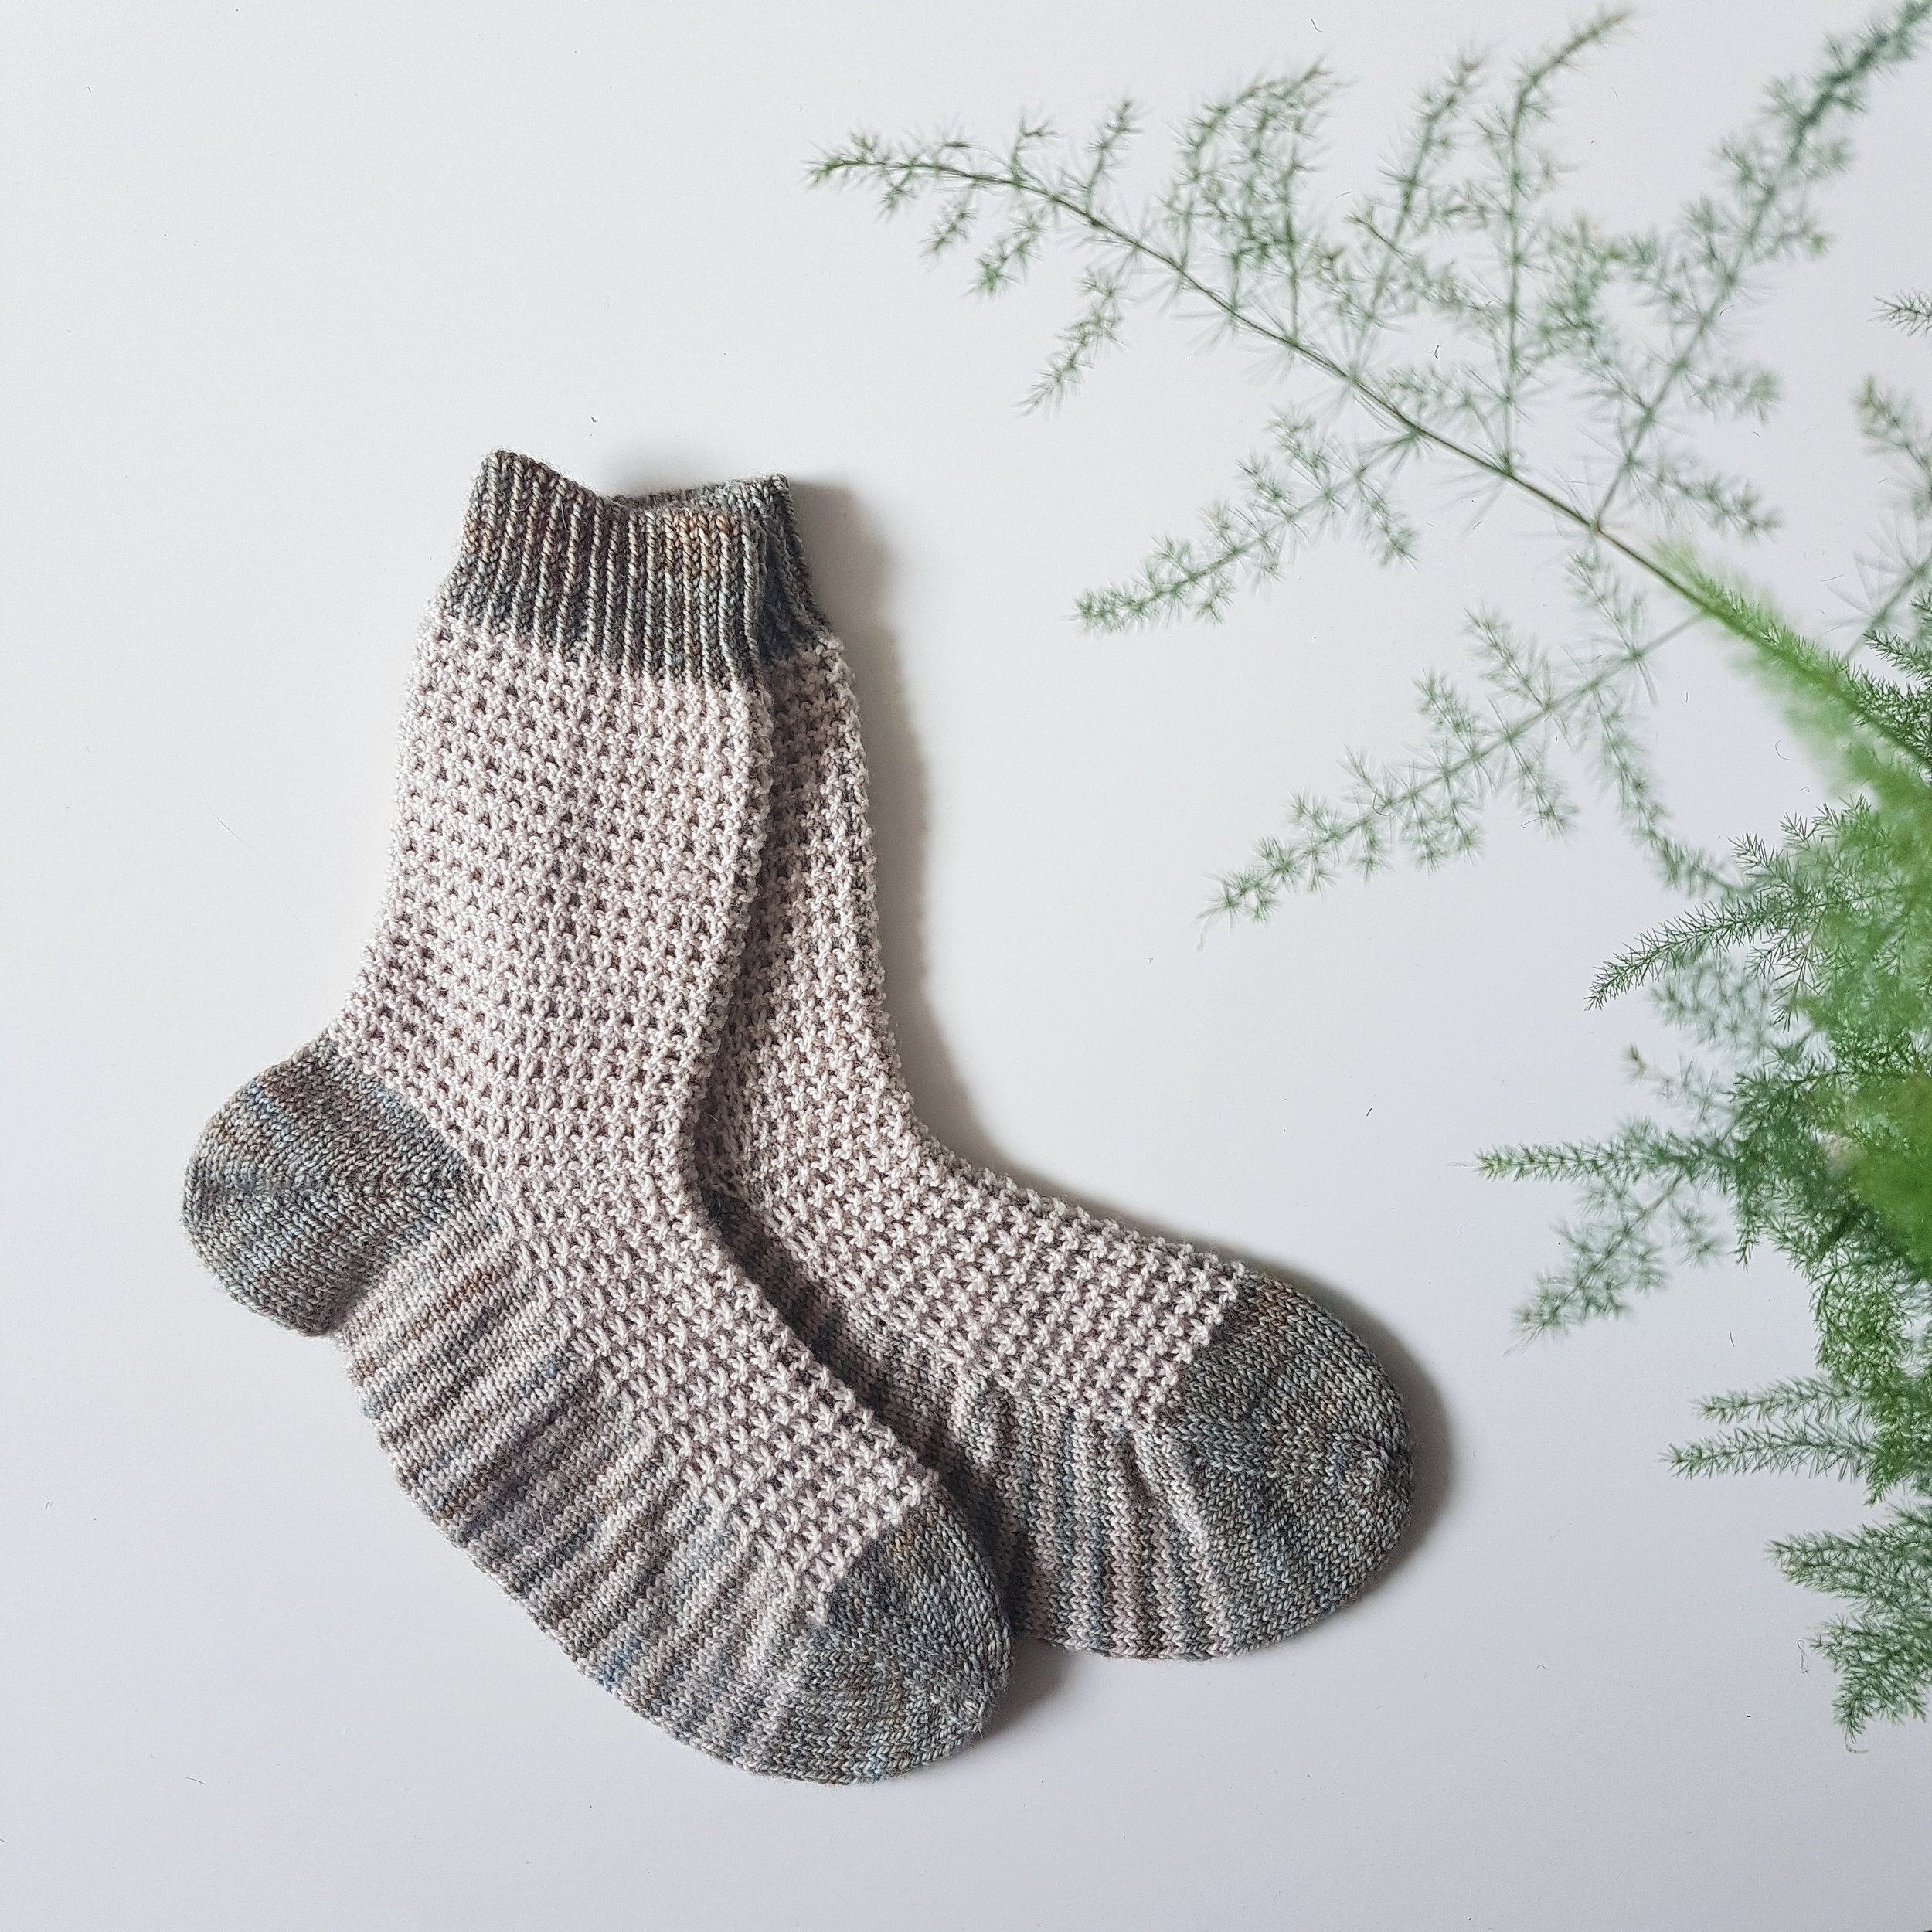 How to Choose the Best Yarn for Your Socks | Sister Mountain